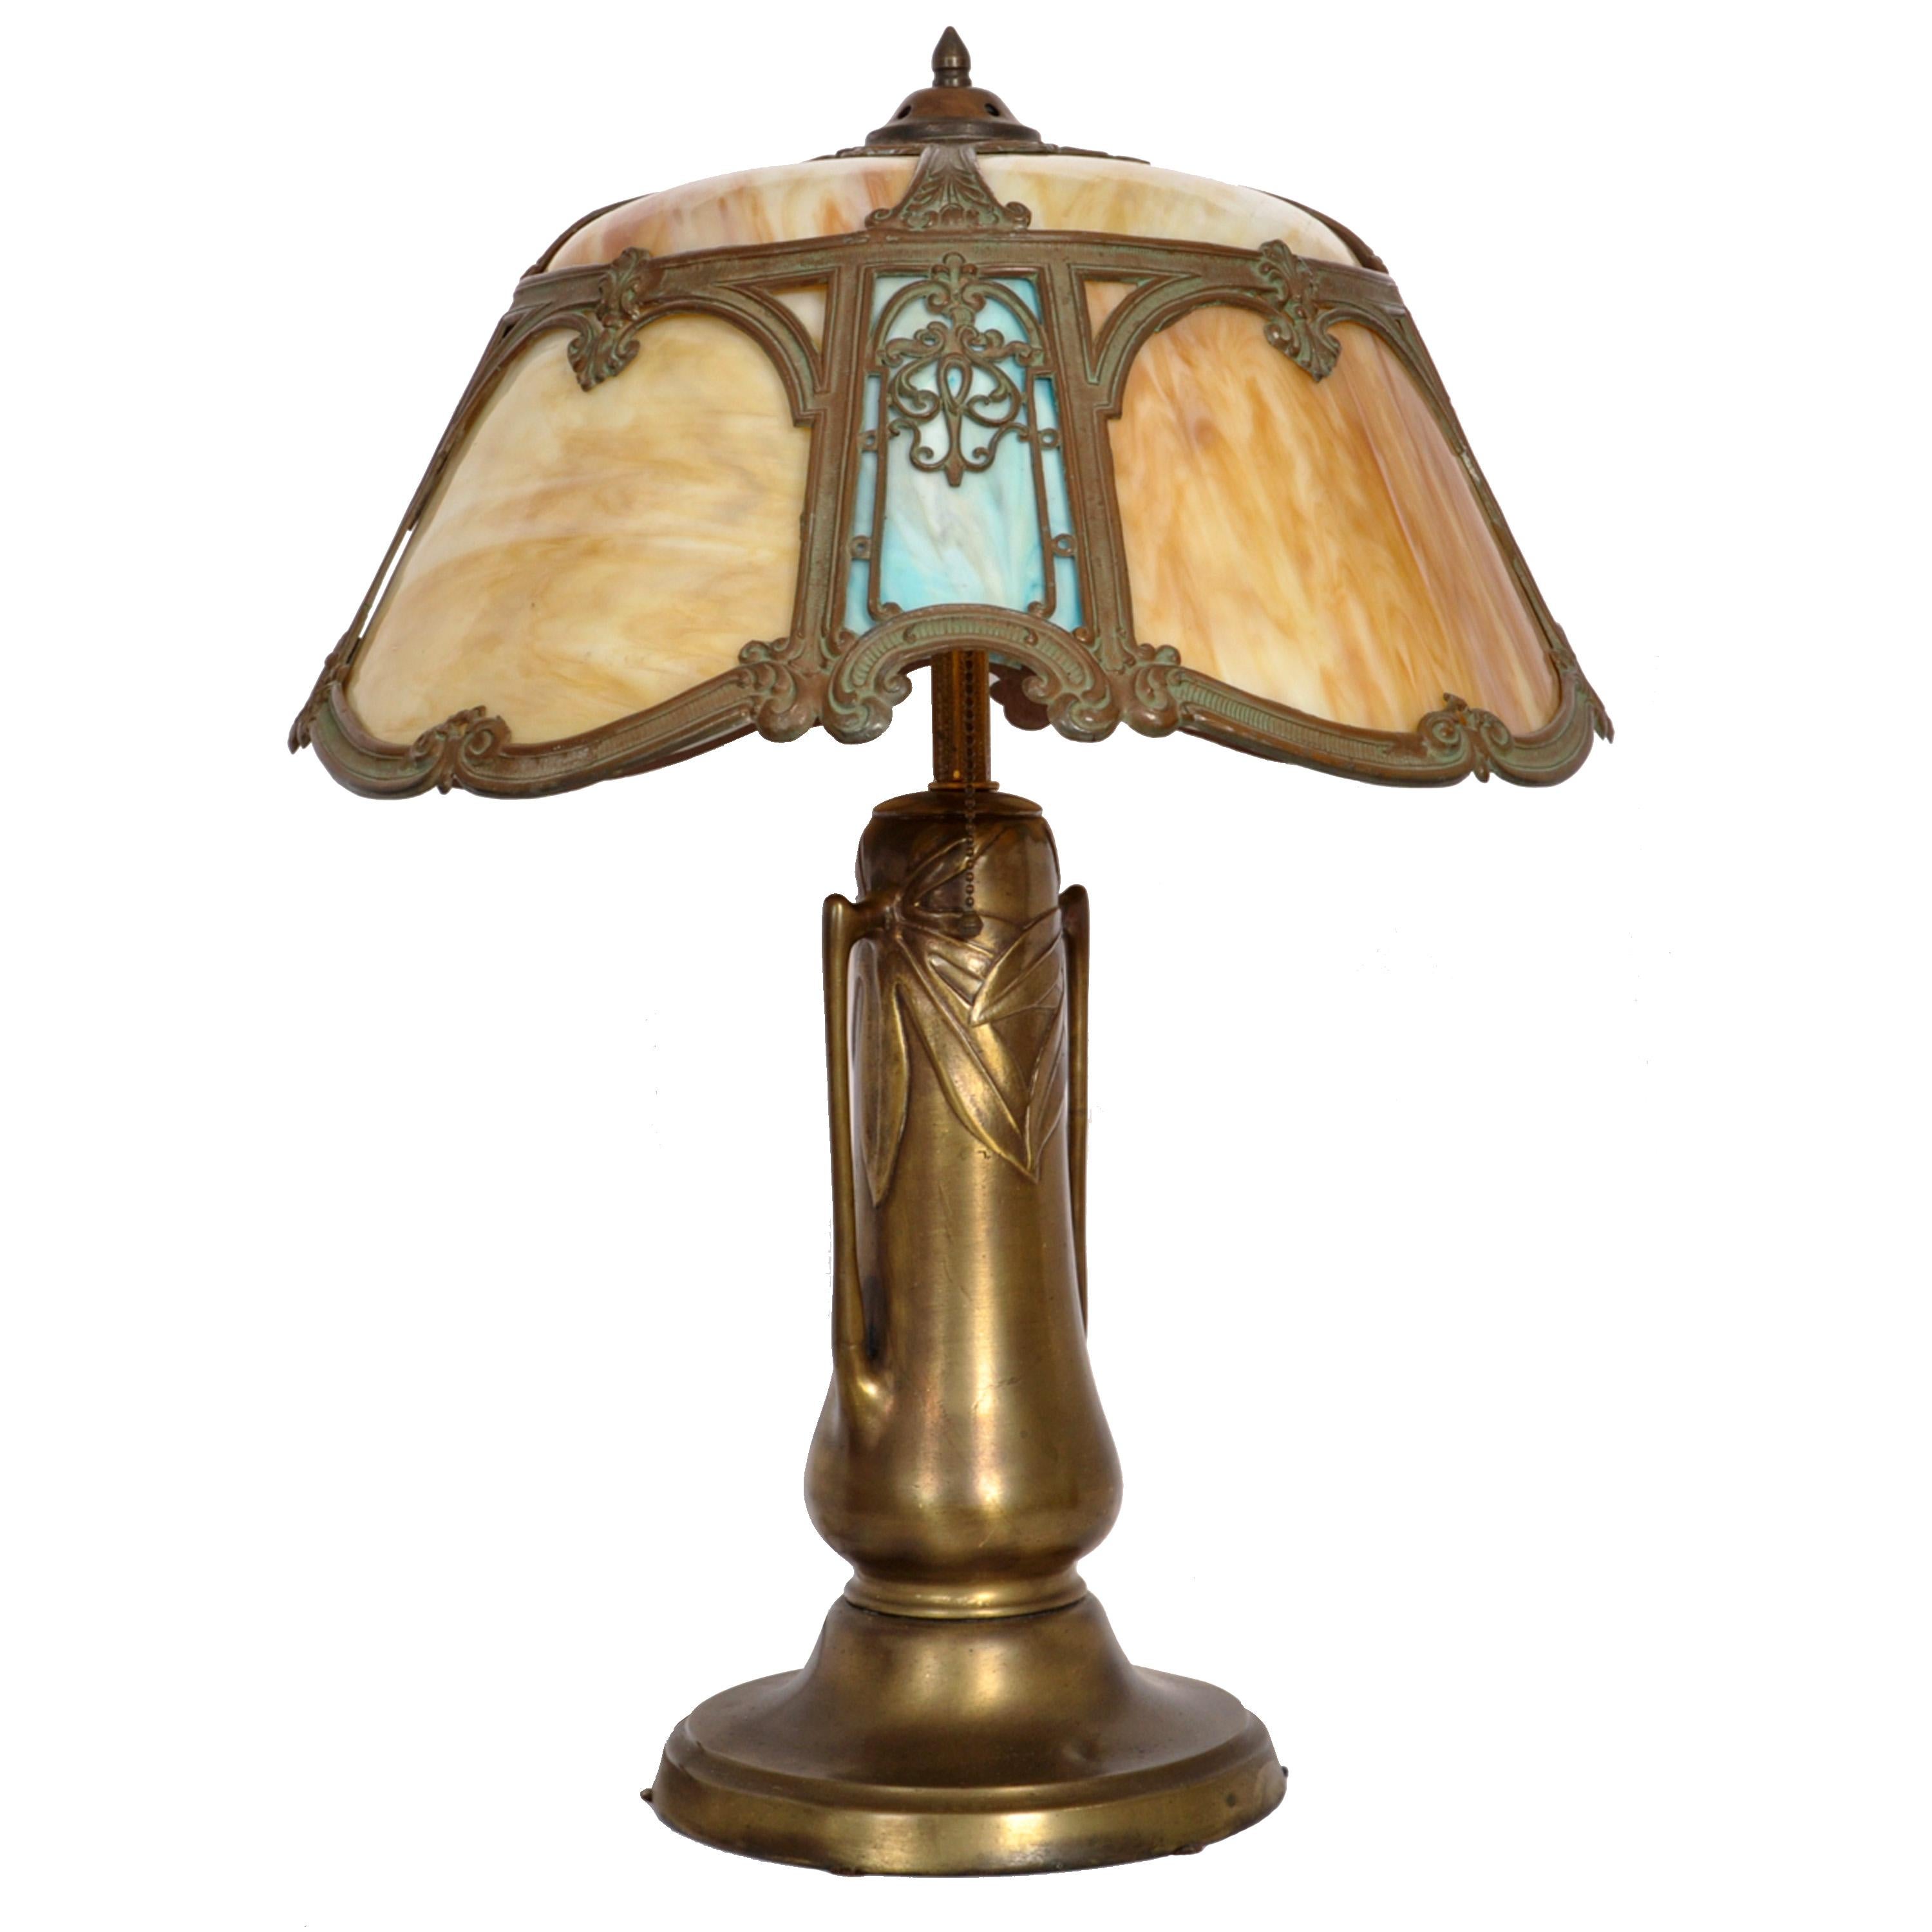 A good and unusual antique American Art Nouveau/ Craftsman/ Mission bronze and slag glass lamp, Circa 1910.
The twin light lamp having a helmet shaped shade with filigree work and is inset with striated caramel and blue slag glass panels.
The gilded